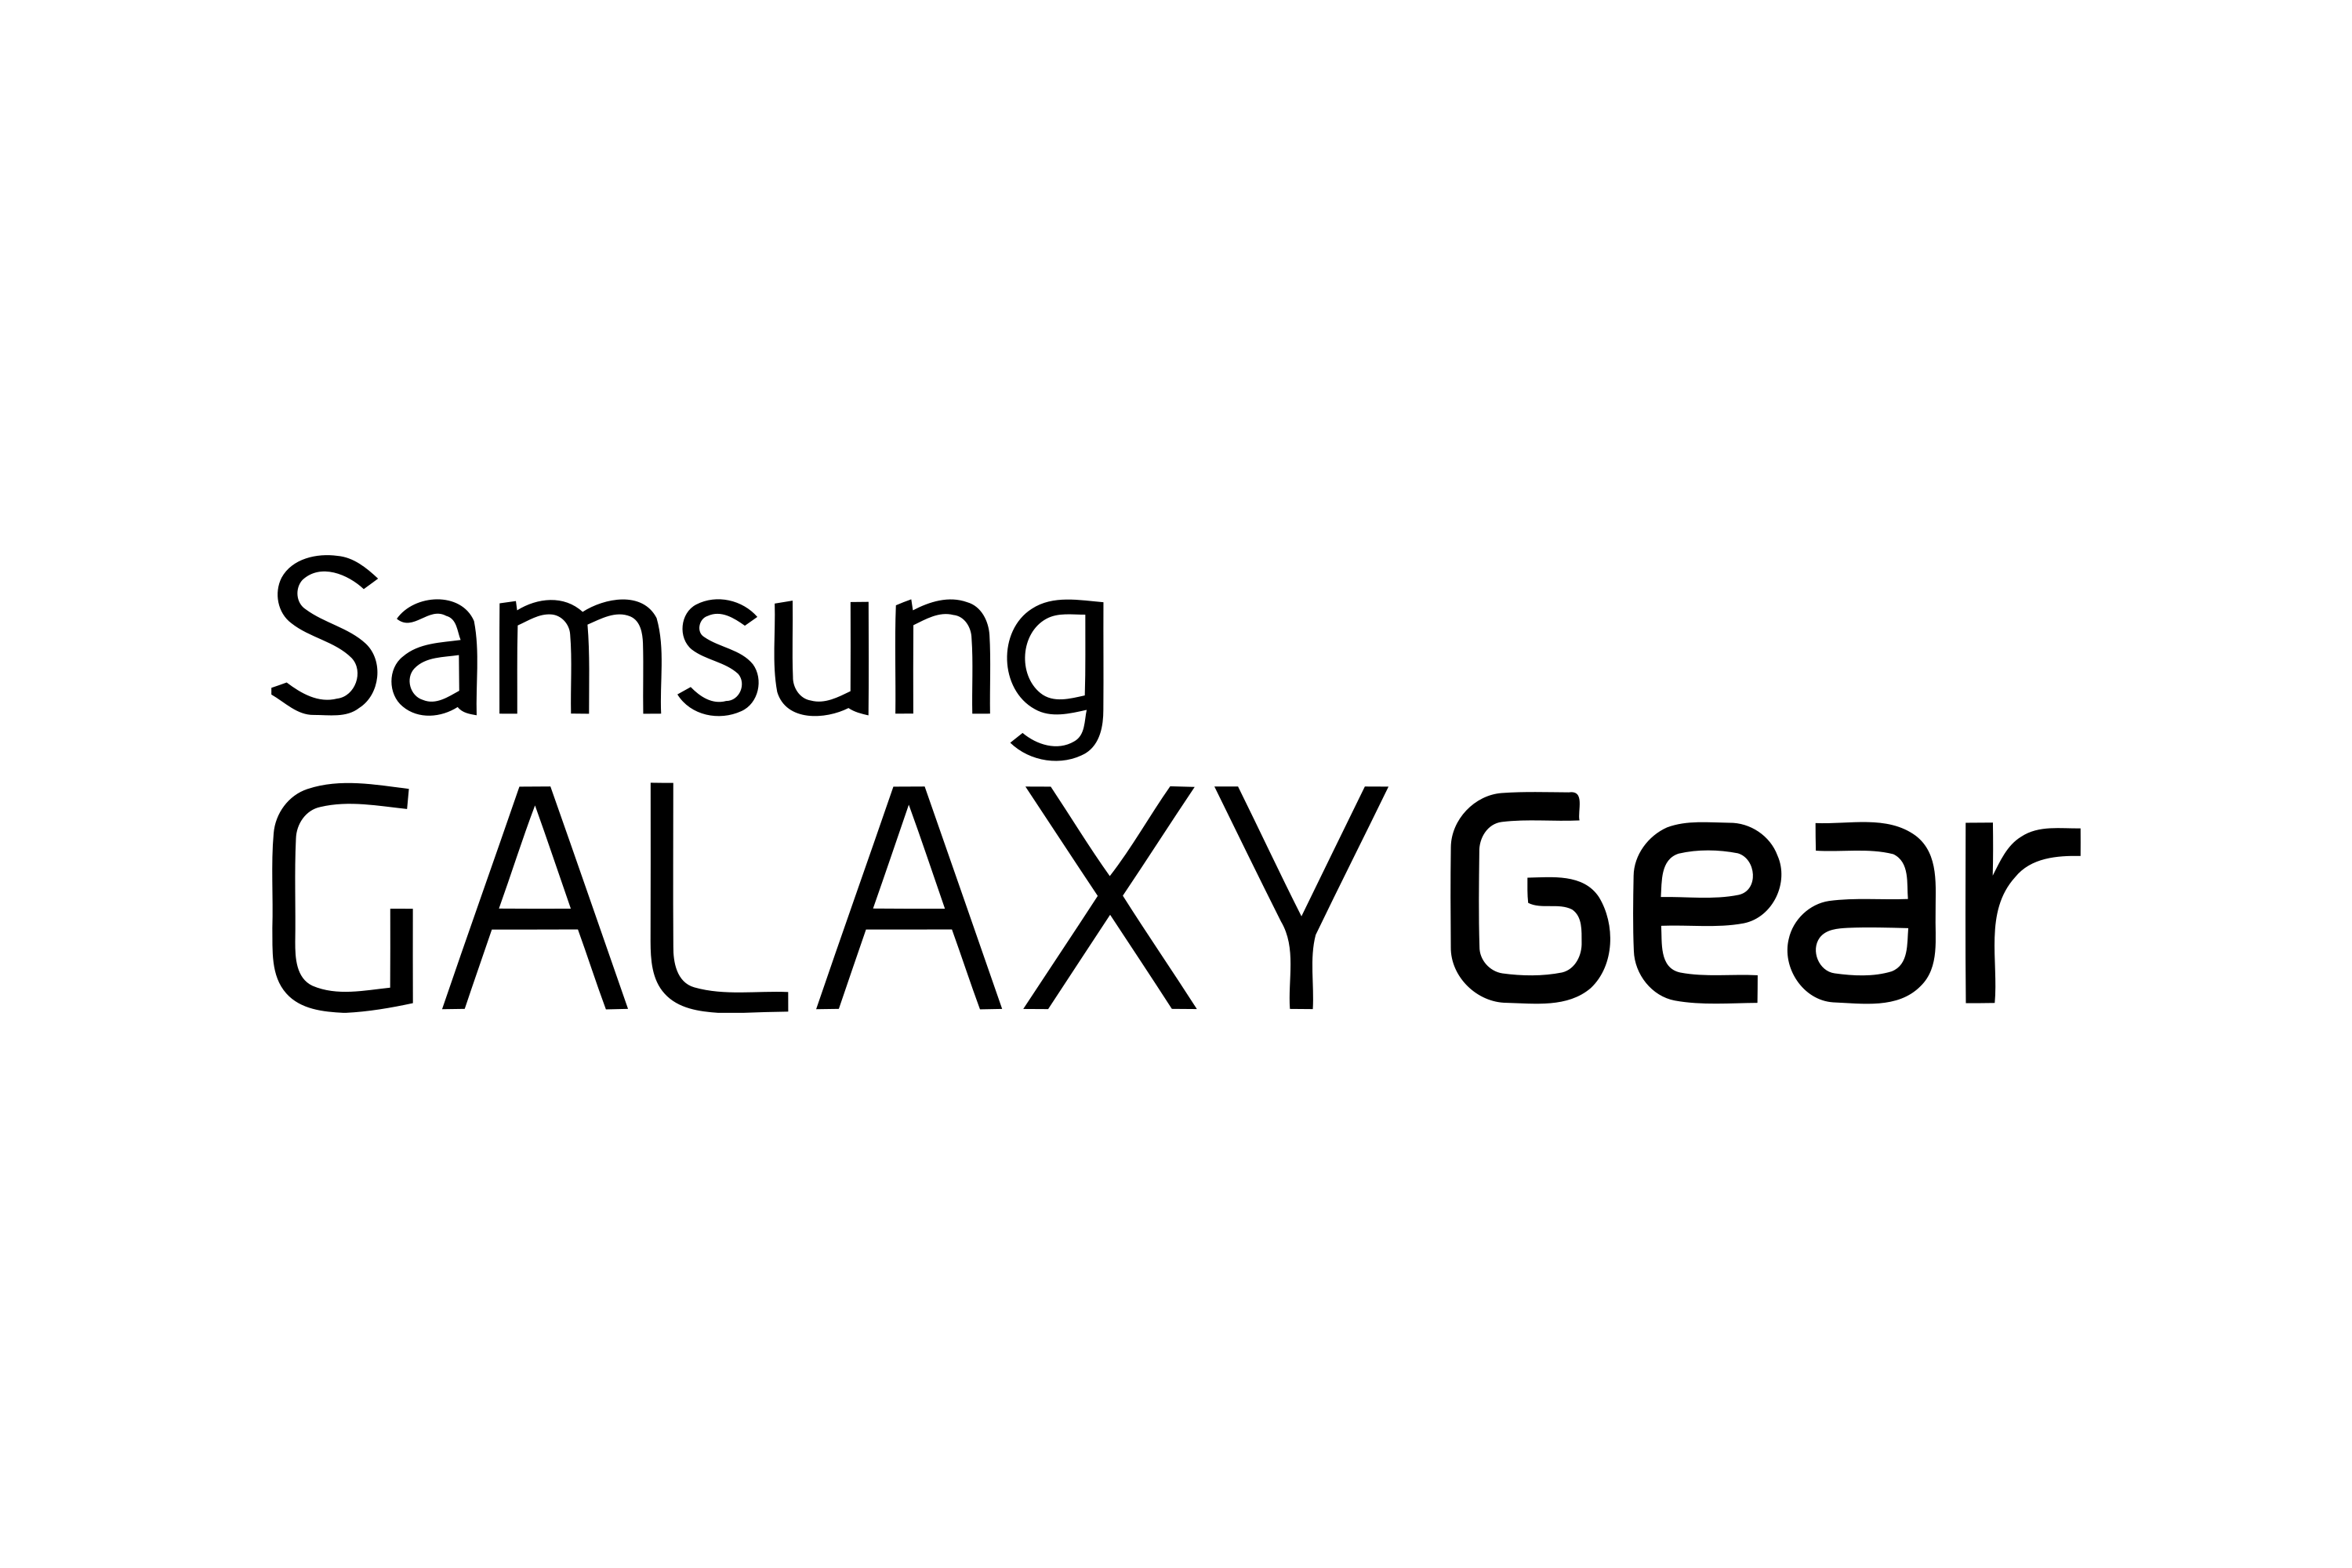 Download Samsung Galaxy Gear Logo In Svg Vector Or Png File Format Logo Wine